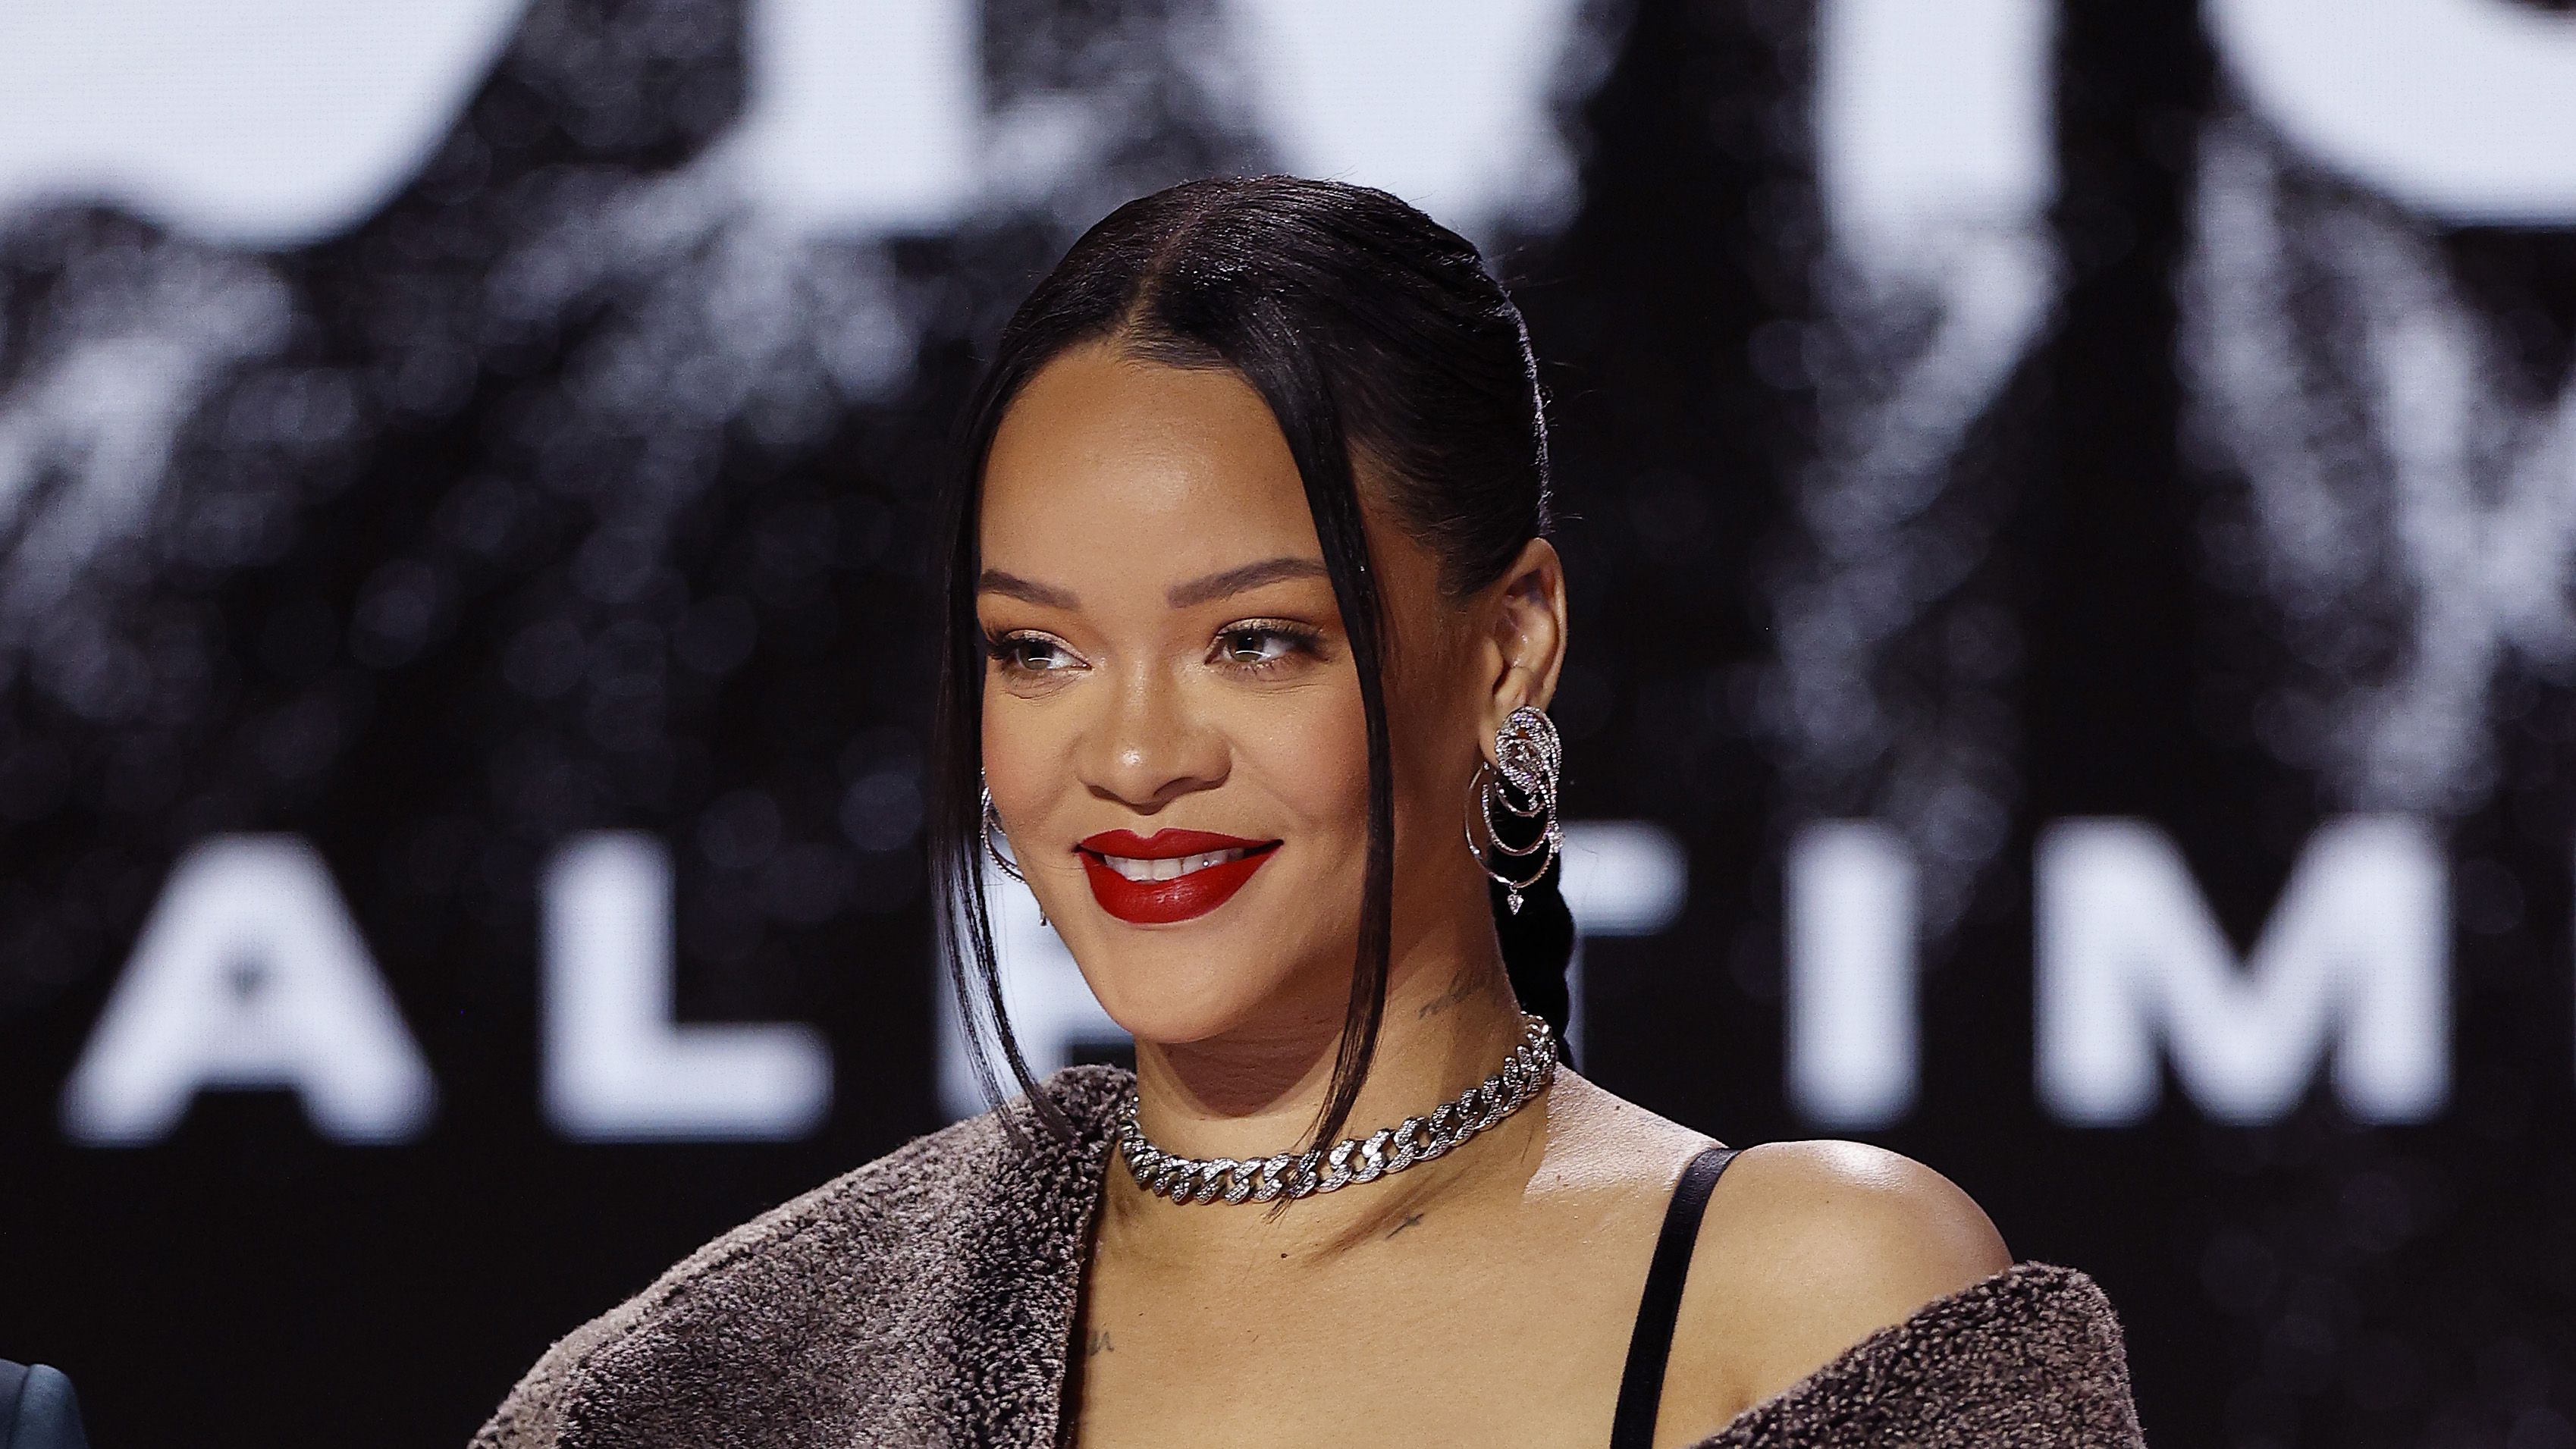 Here's what Rihanna wore at her Super Bowl 2023 halftime show